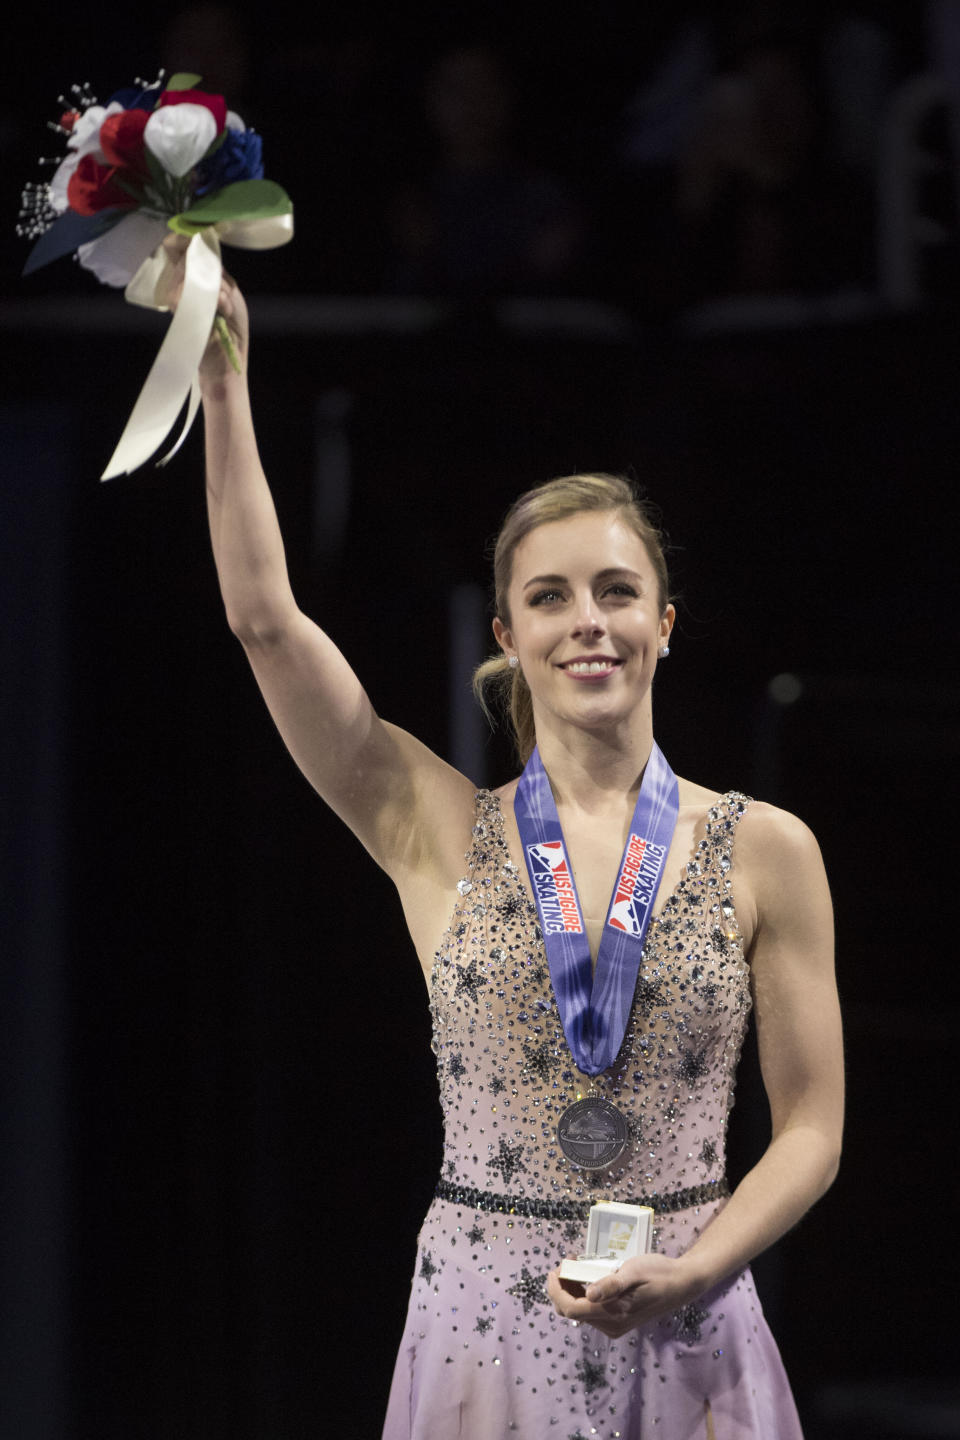 Olympic figure skater Ashley Wagner, seen here&nbsp;during the 2018 U.S. Figure Skating Championships, has said she was sexually assaulted by fellow skater John Coughlin at 17. (Photo: USA Today Sports / Reuters)